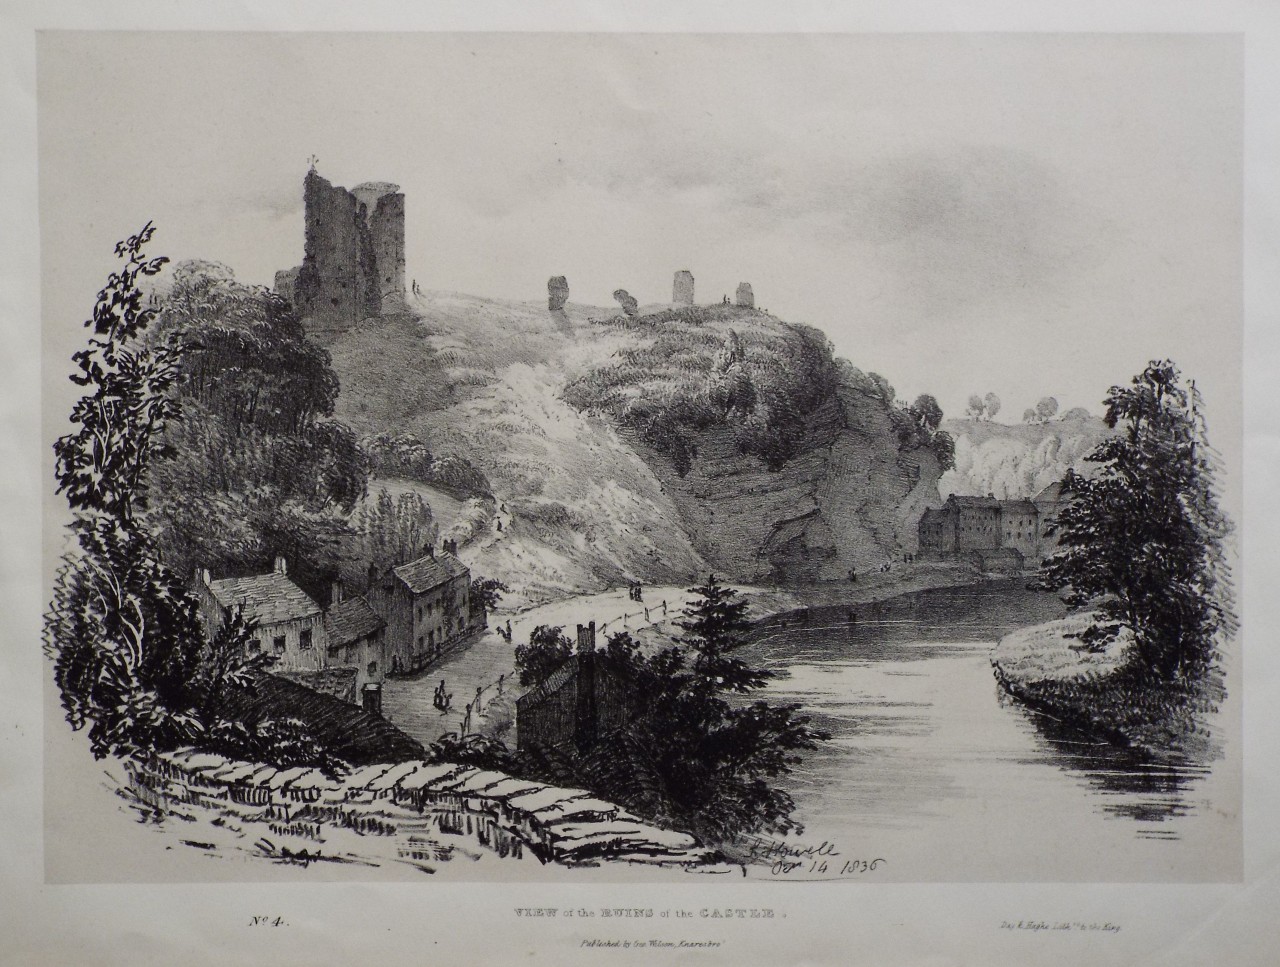 Lithograph - View of the Ruins of the Castle. - Howell